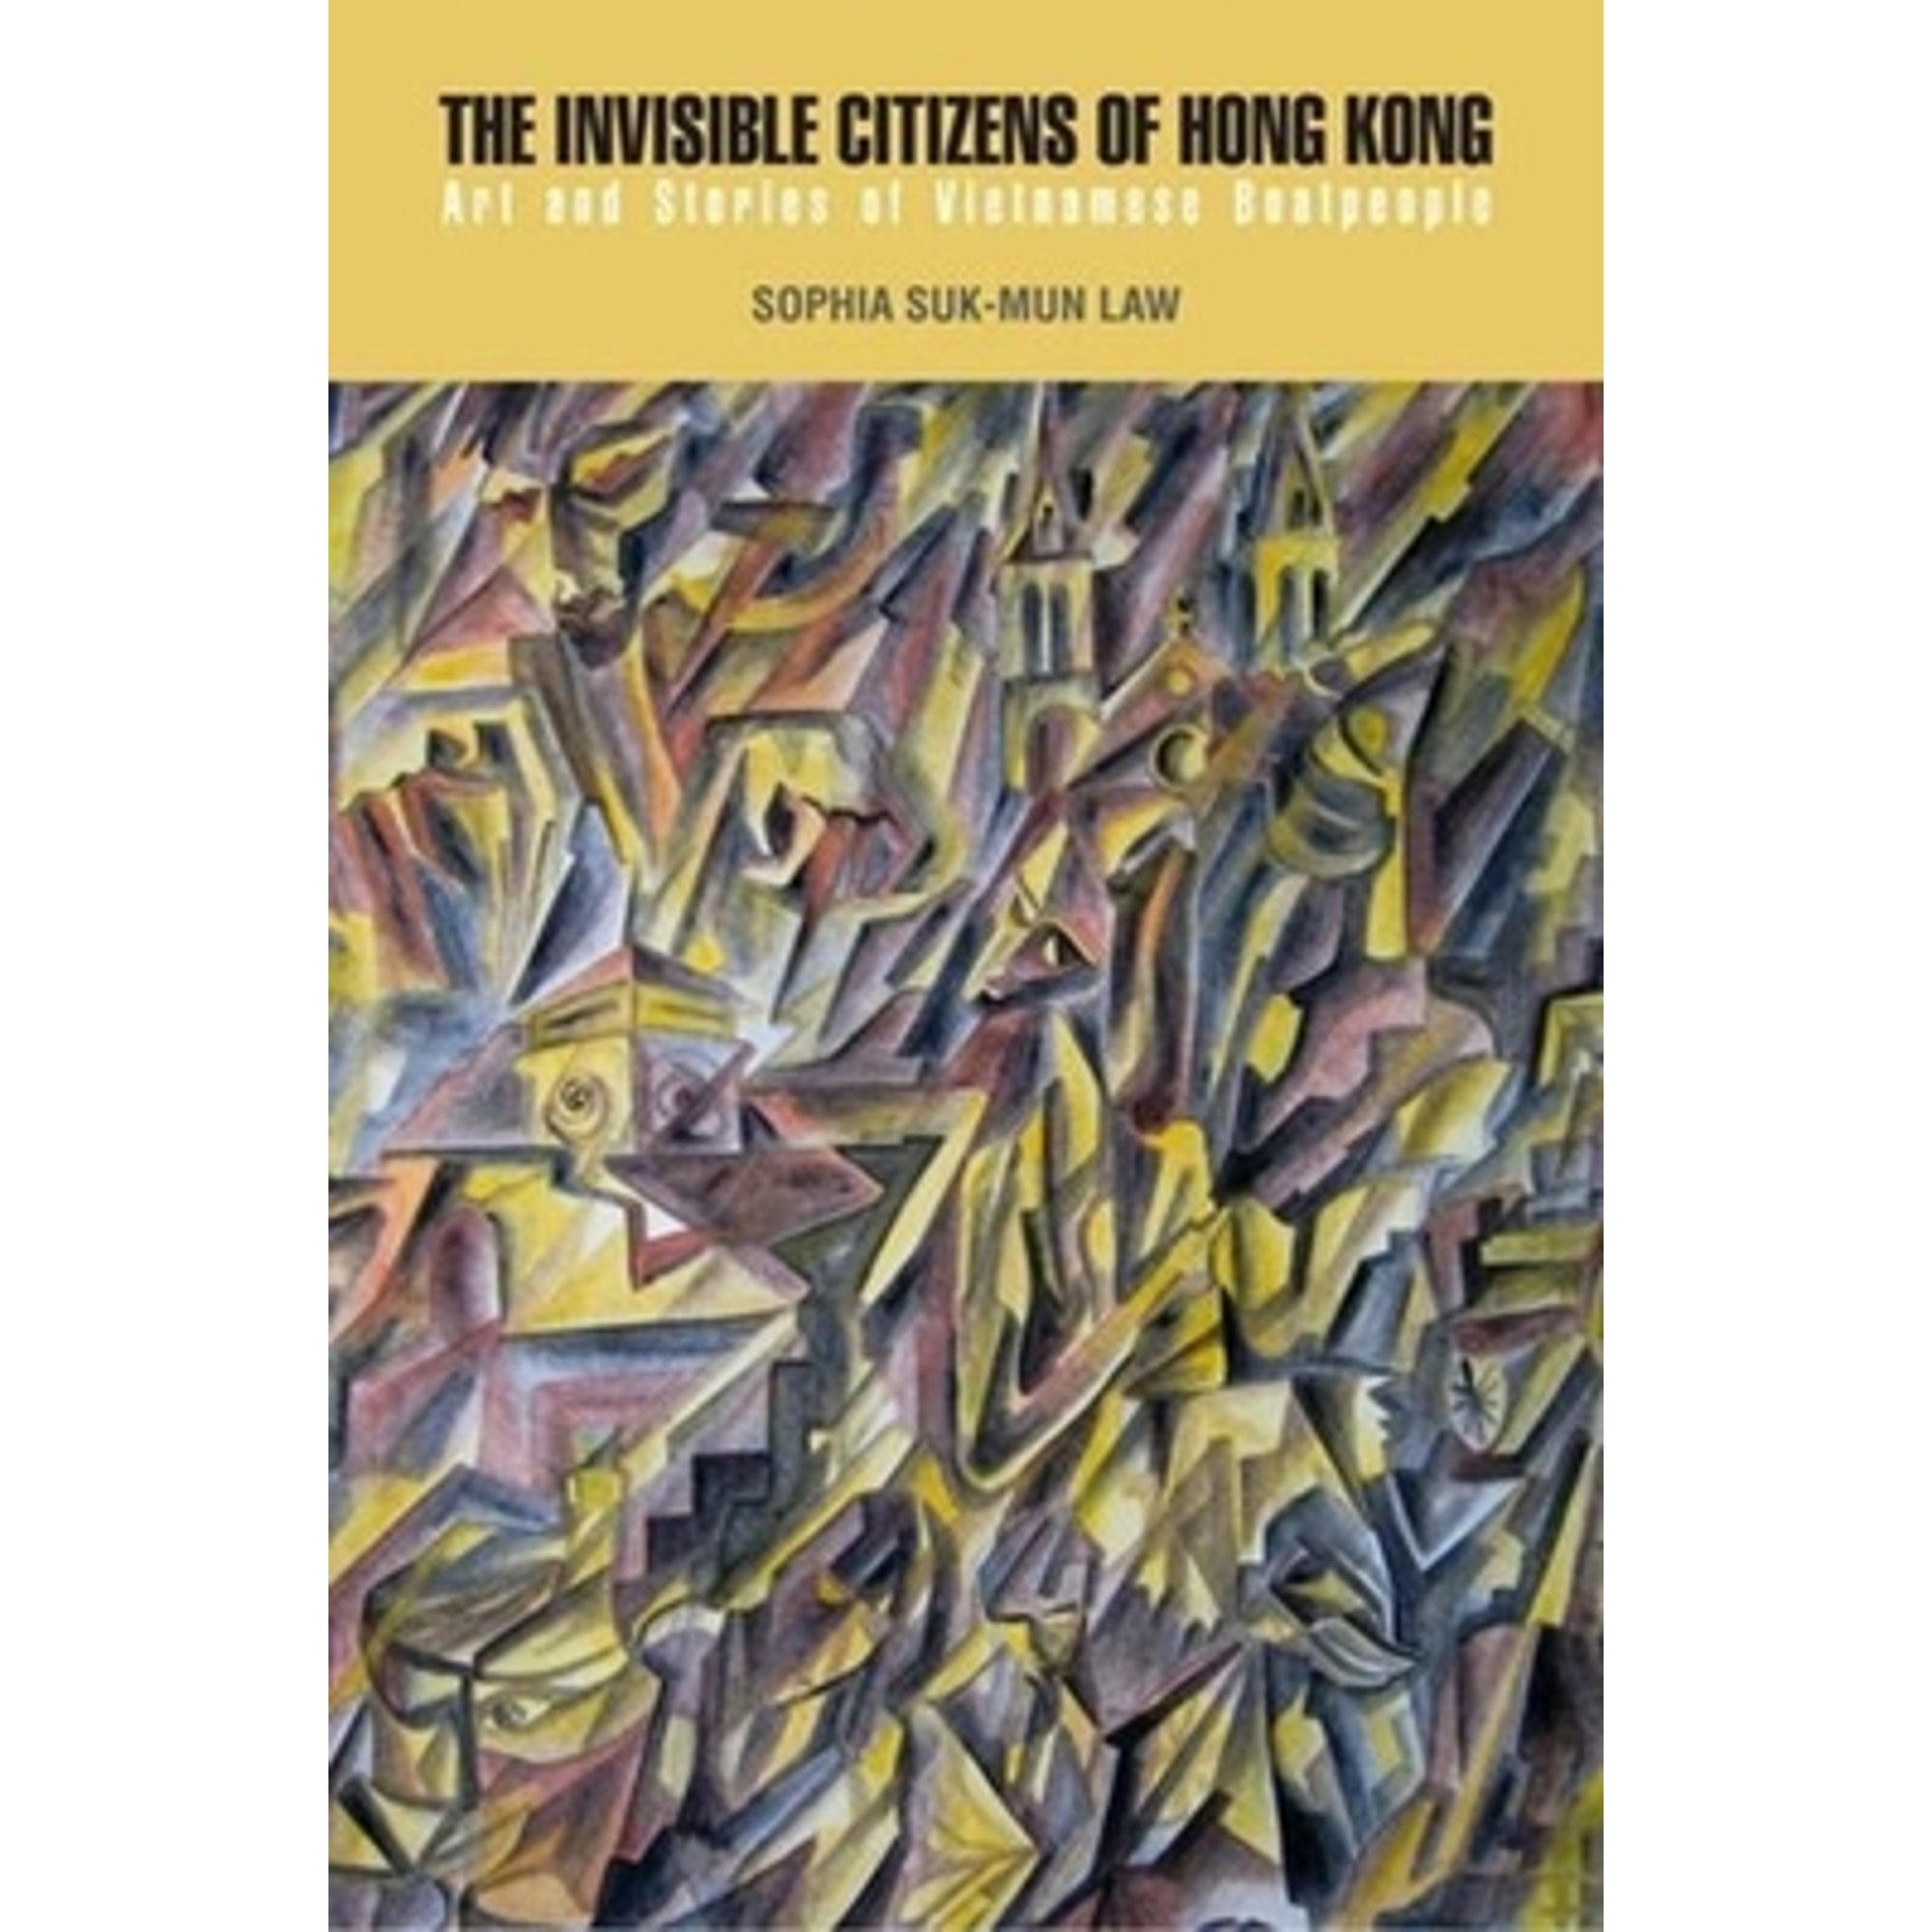 Pre-Owned The Invisible Citizens of Hong Kong: Art and Stories of Vietnamese Boatpeople (Hardcover 9789629966331) by Sophia Suk Law